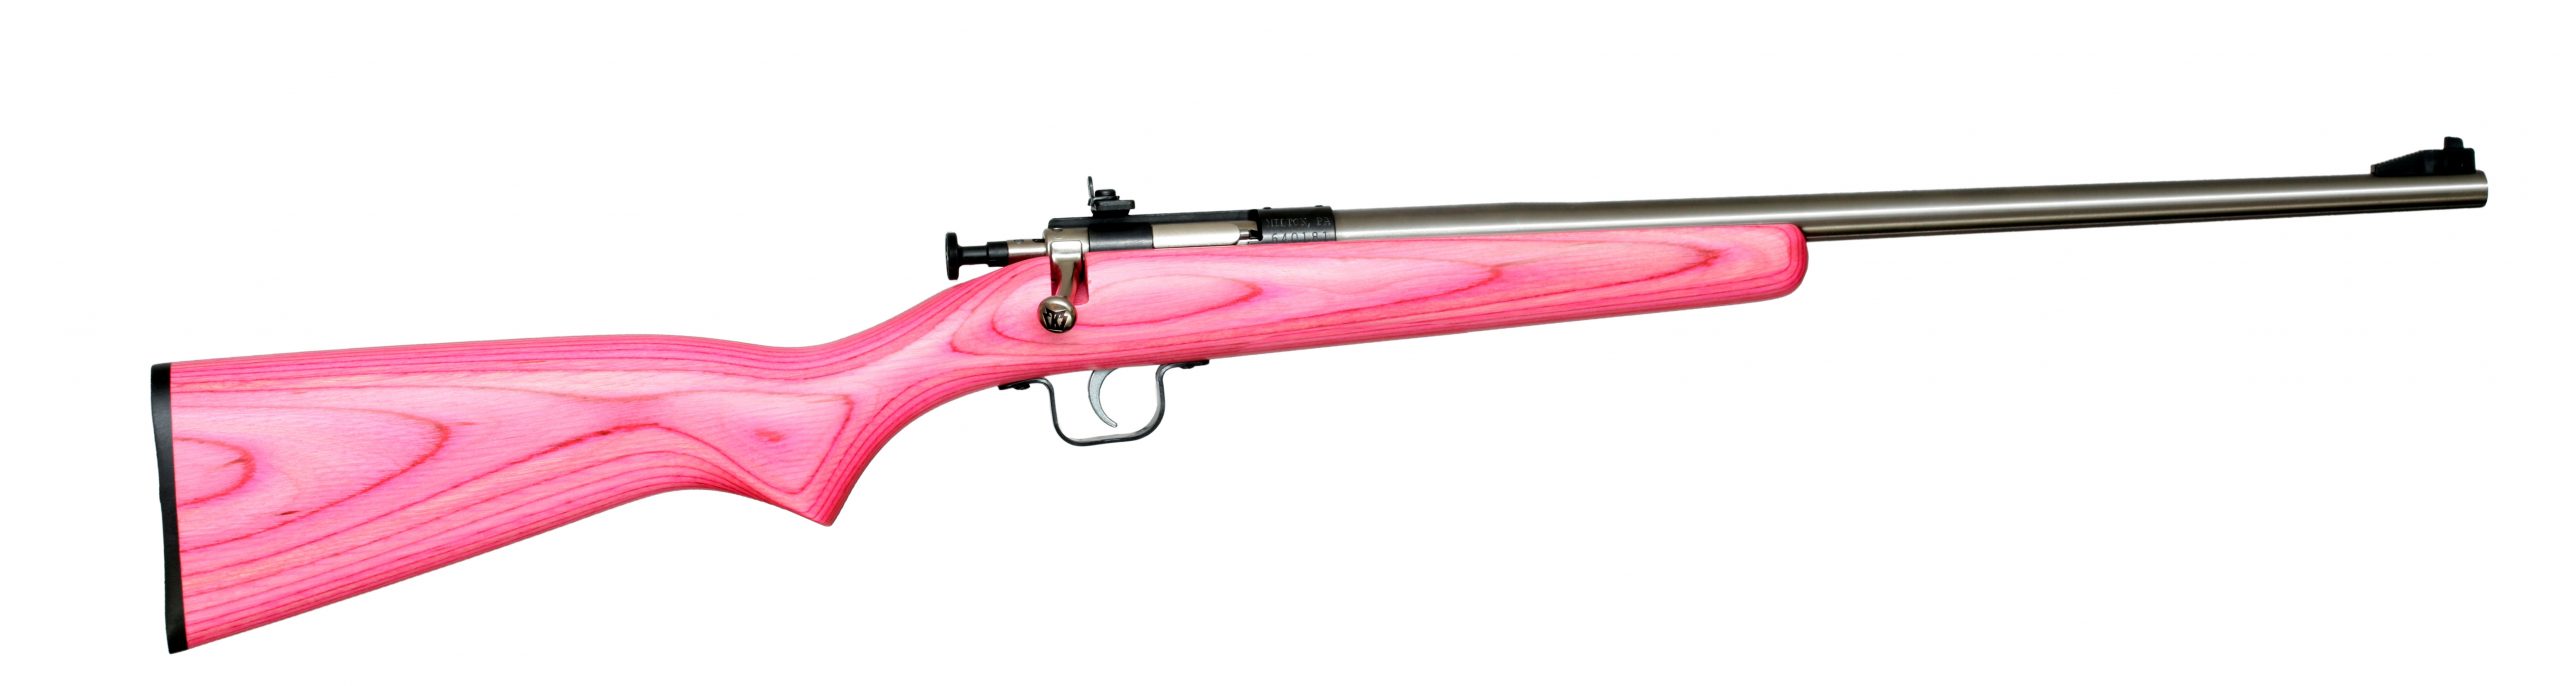 Keystone Sporting Arms Crickett 22Lr Ss/Pink Lam Blue Receiver W/Stainless Bbl Ksa2226 Scaled